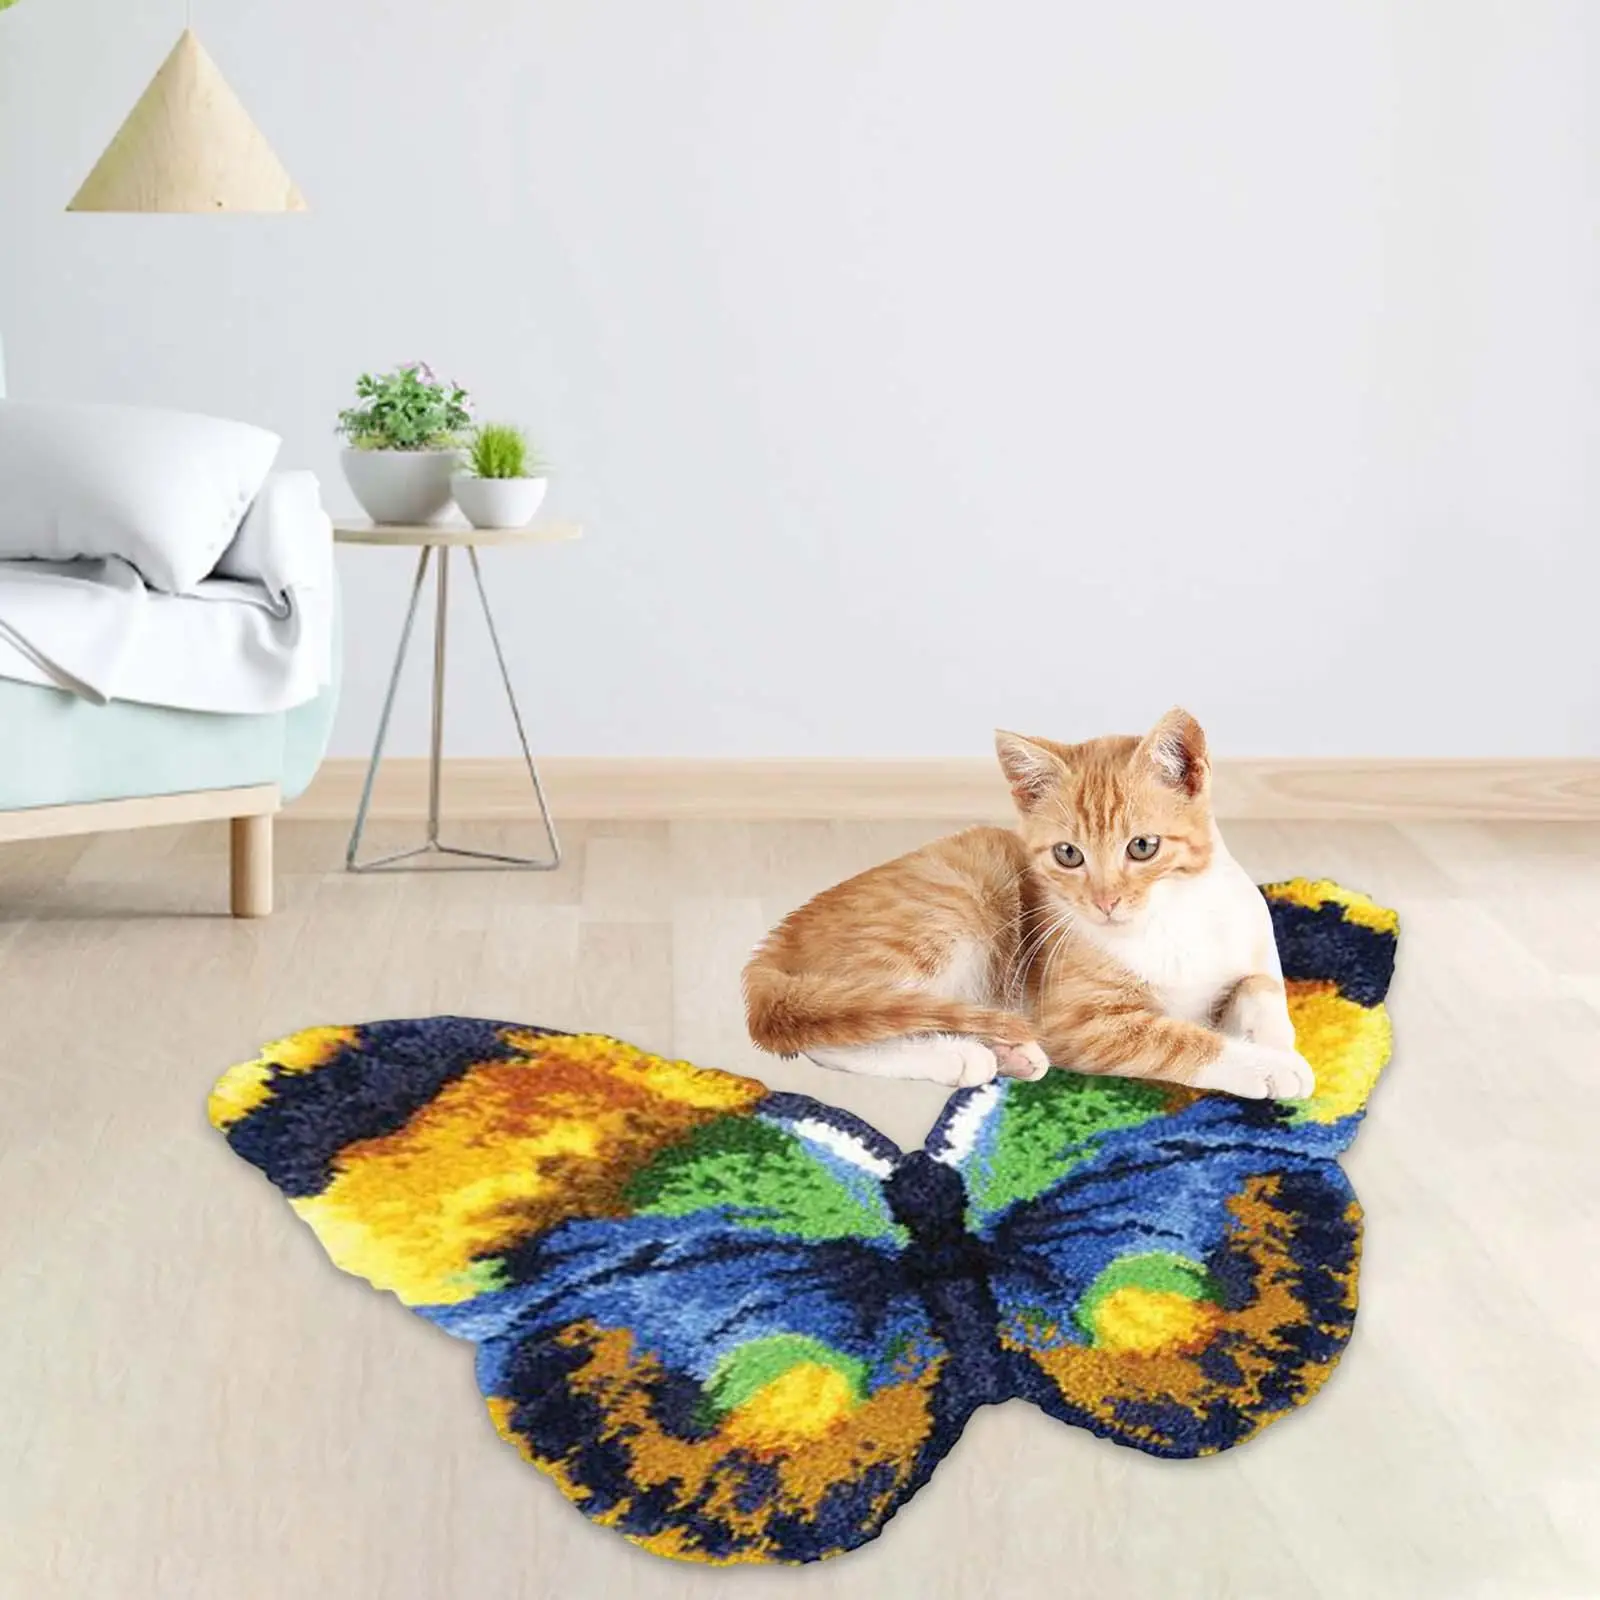 Latch Hook Rug Kit Butterfly DIY Rug Carpet Needlework Home Decoration Latch Hook Kits for Adults for Christmas Adults Beginners